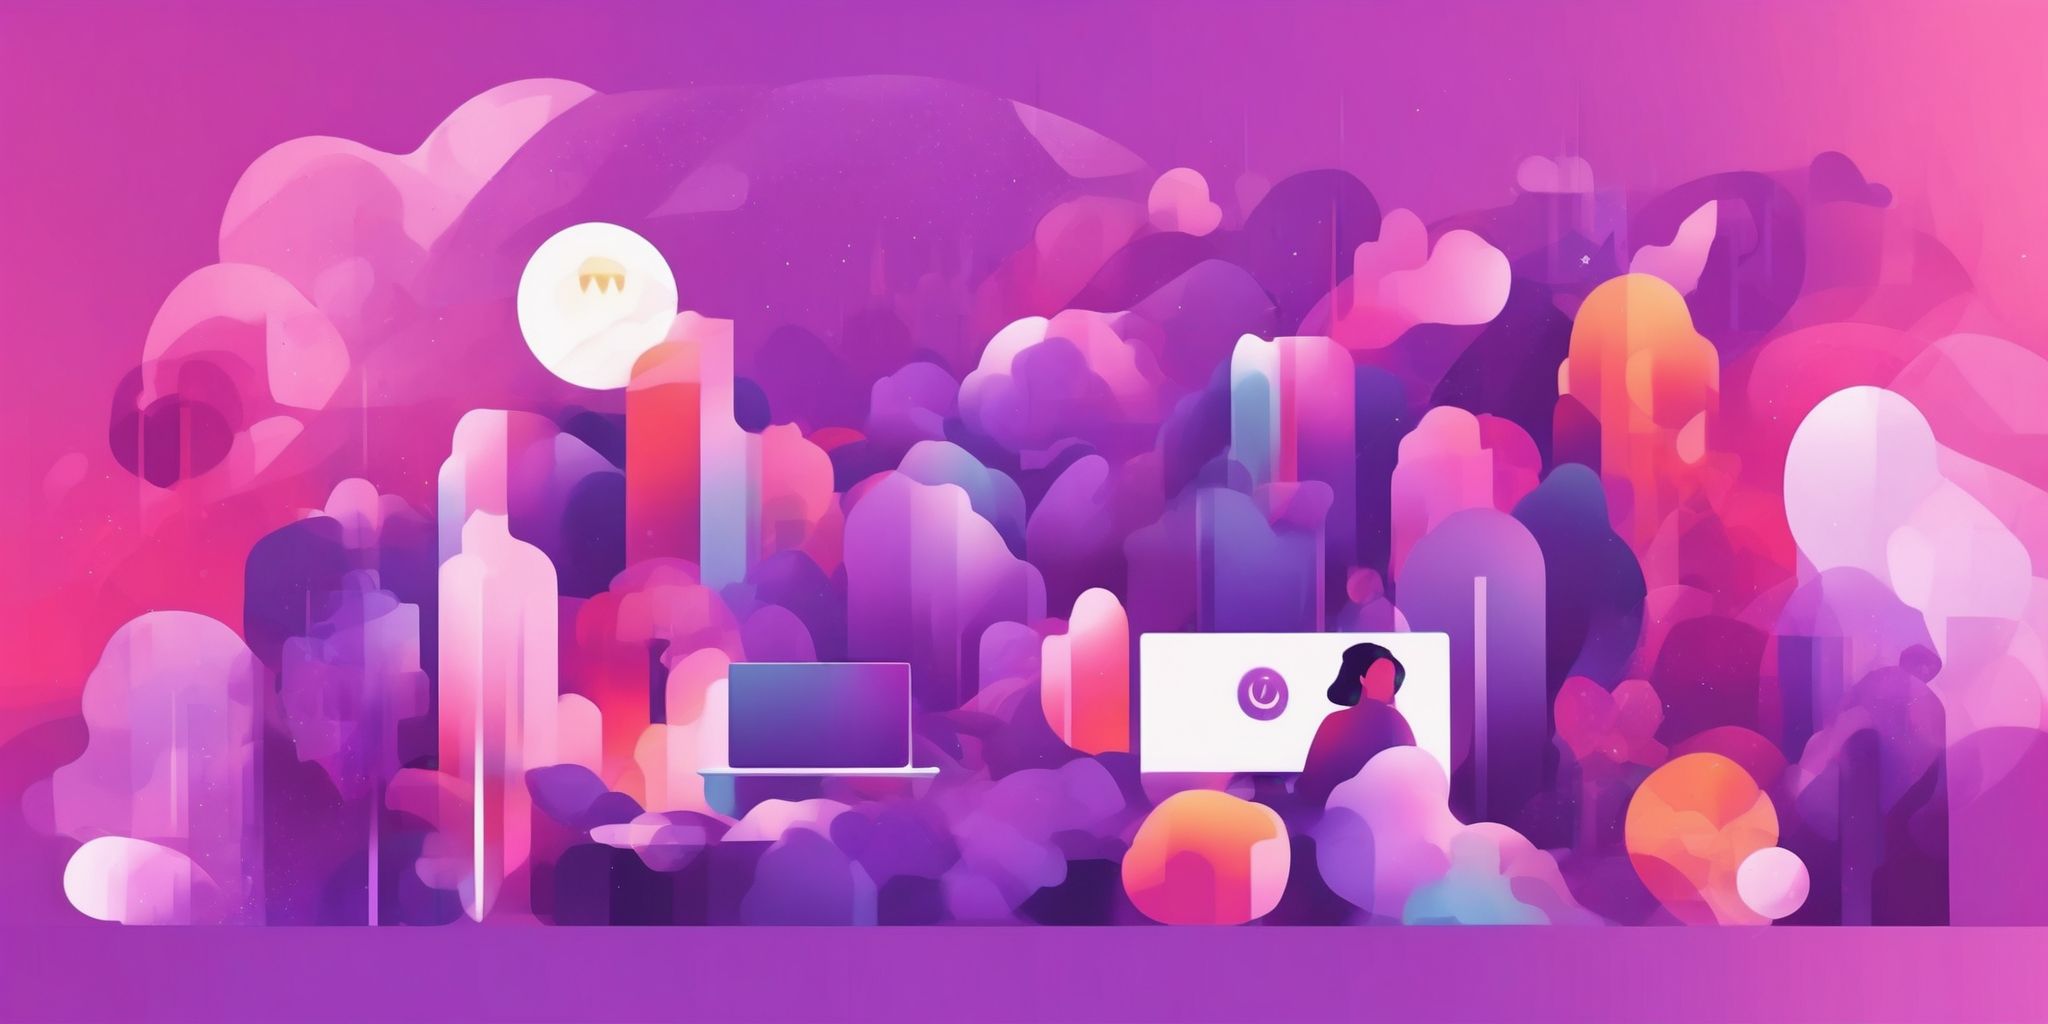 Identity in flat illustration style, colorful purple gradient colors